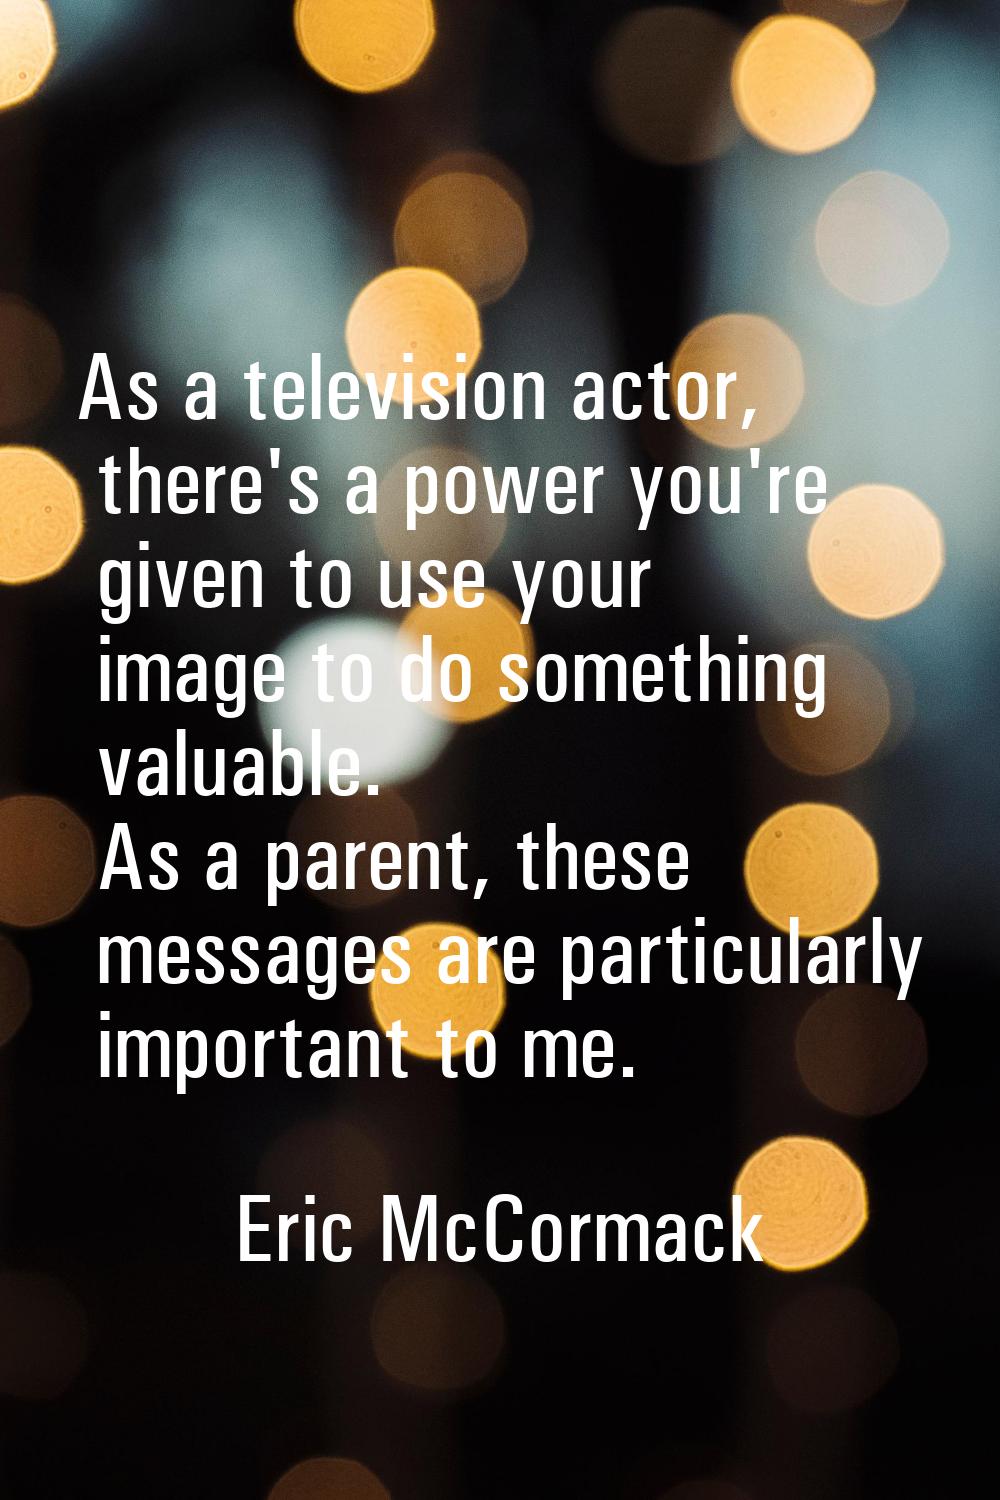 As a television actor, there's a power you're given to use your image to do something valuable. As 